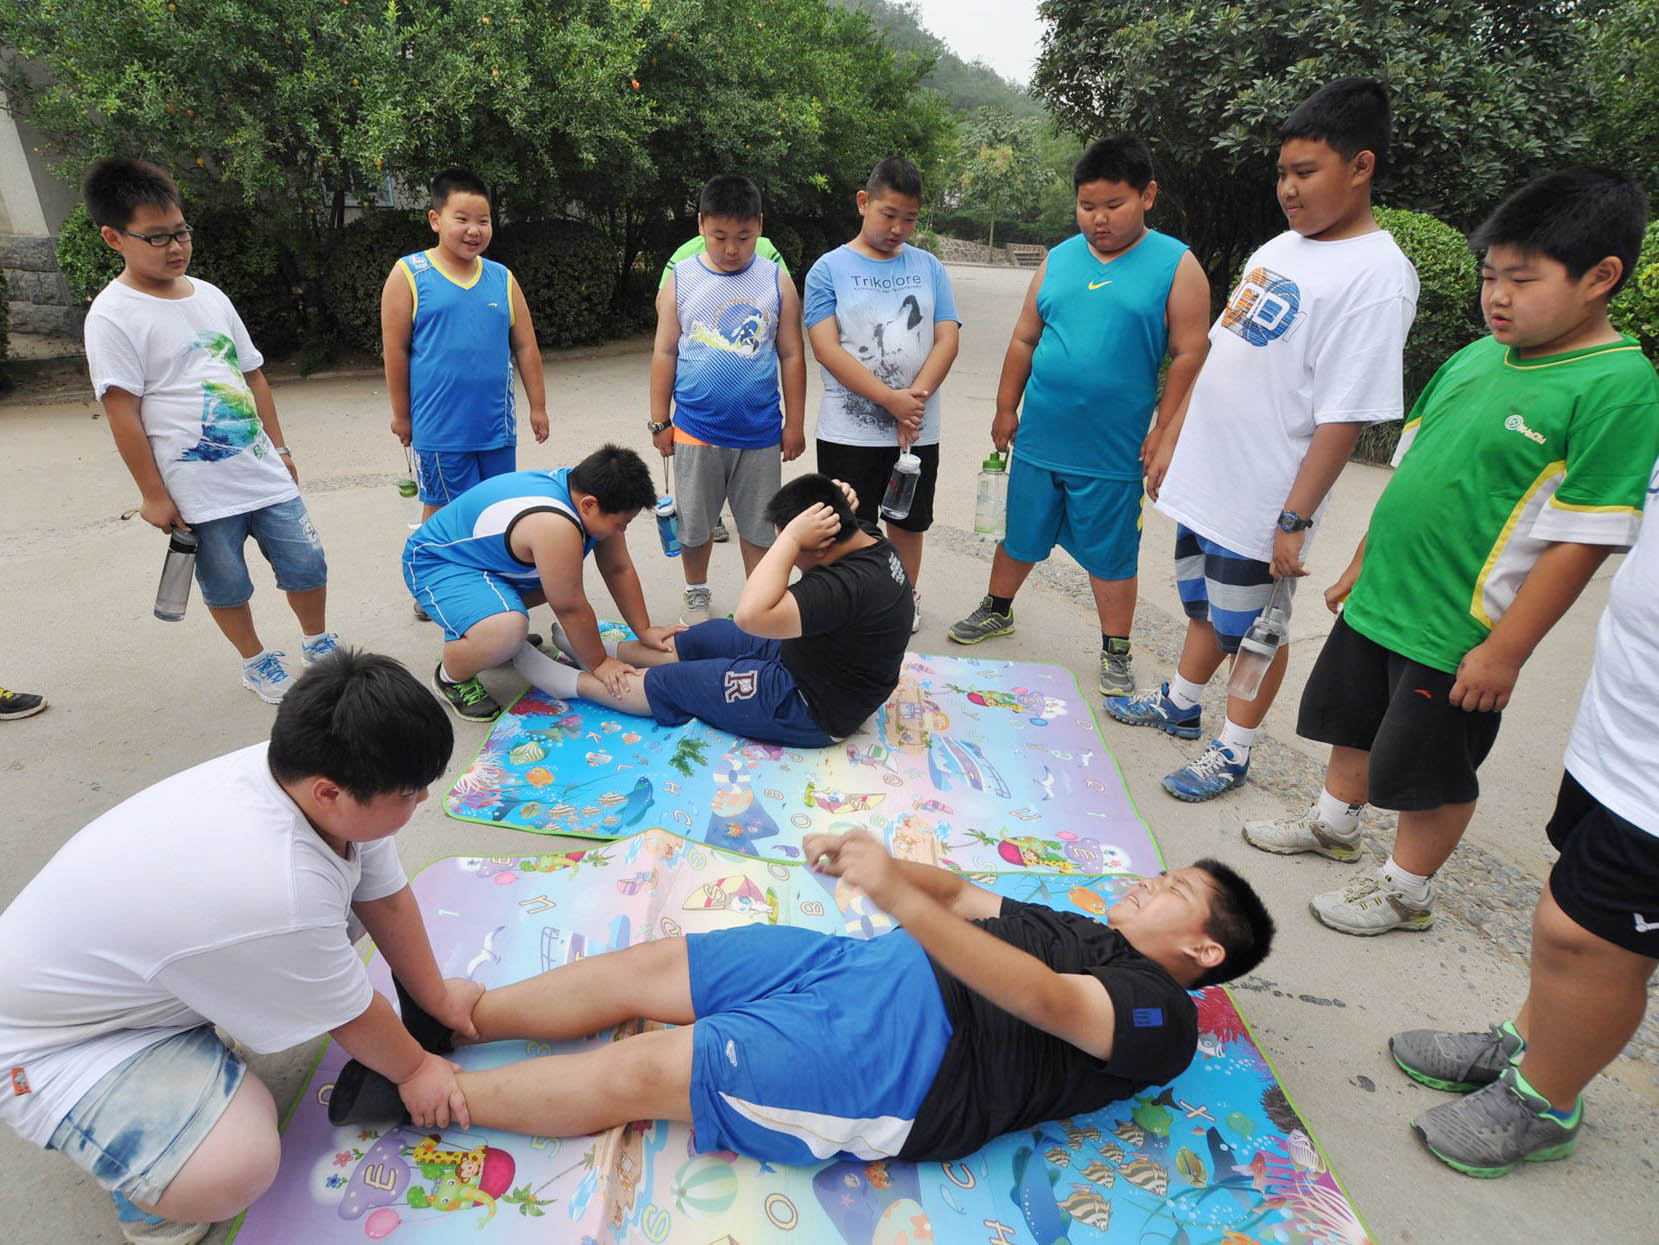 Children in China are being sent to weight-loss summer camps such as this one in hengzhou city, central China's Henan Province